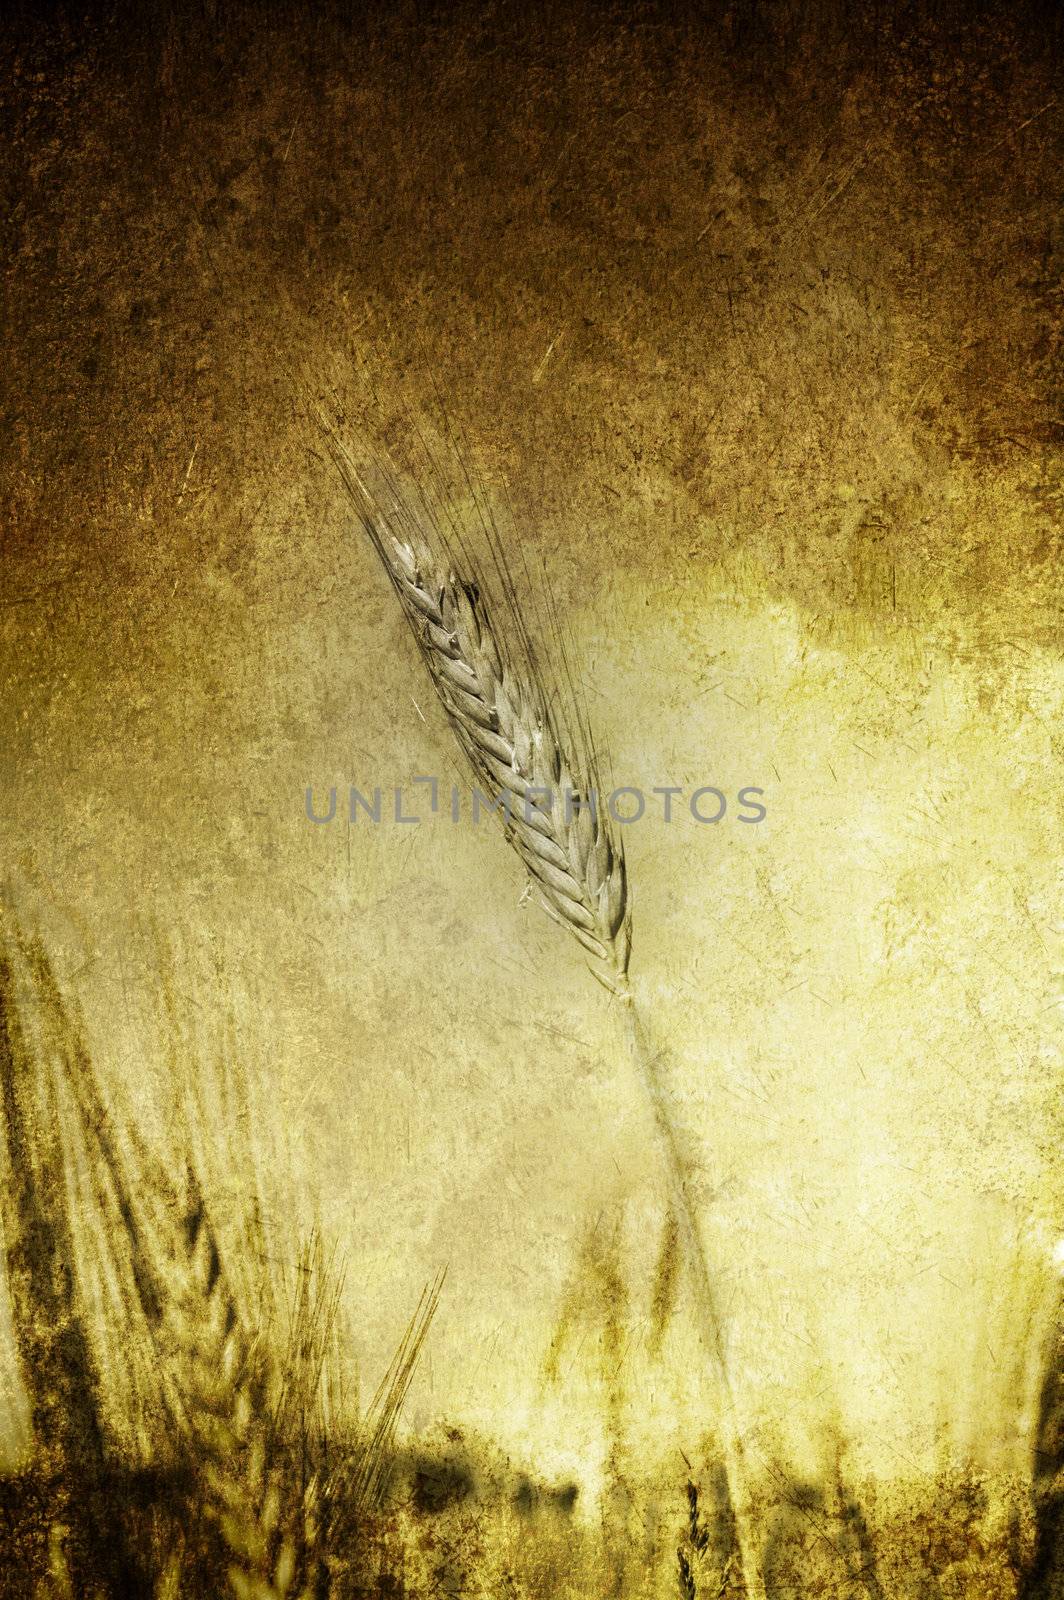 A grunge and yellow field of grain